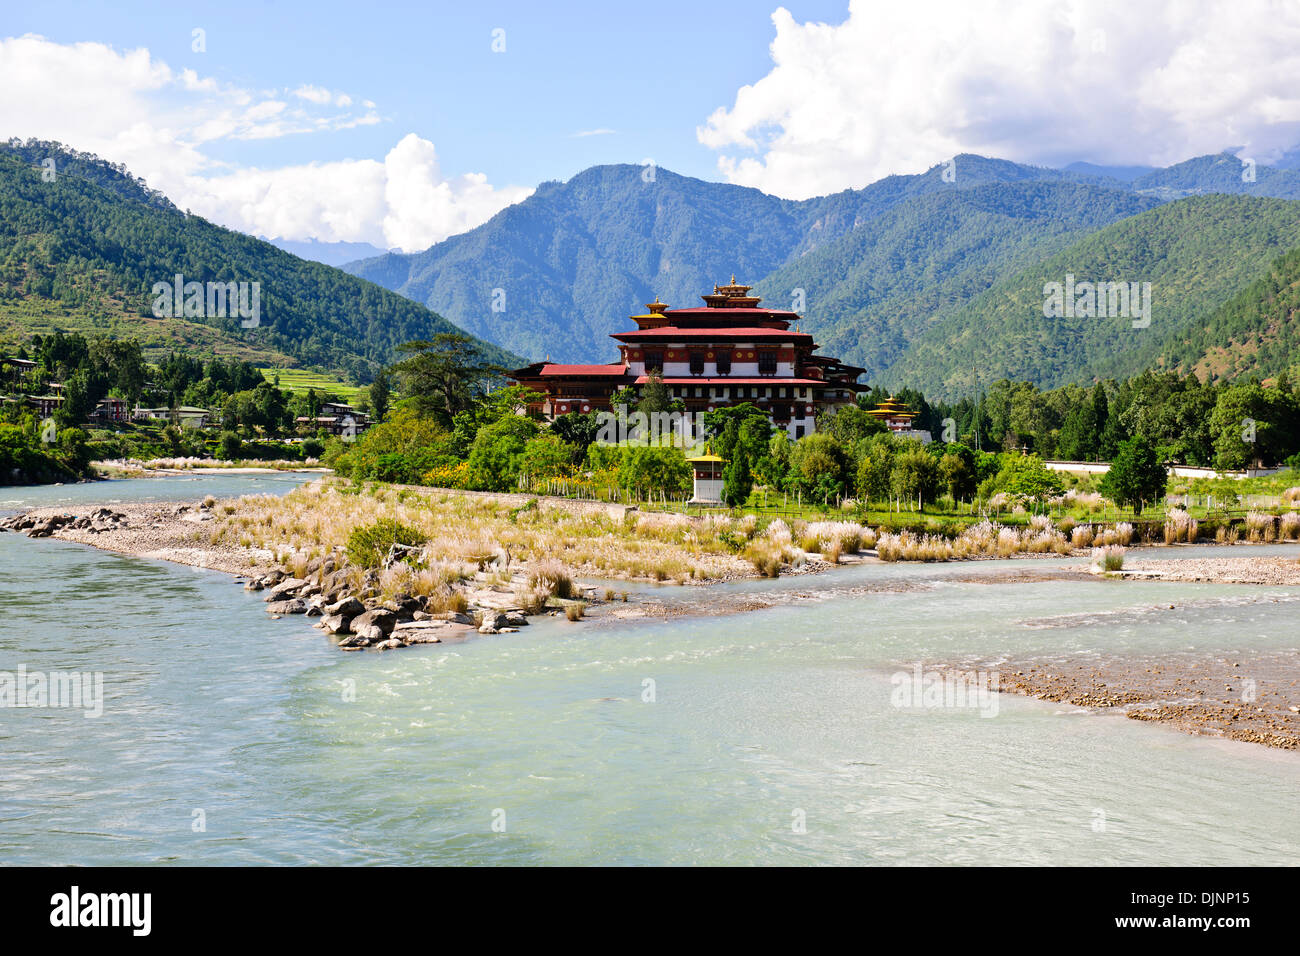 Punakha Dzong,The head of the clergy of Bhutan with his entourage of Buddhist monks spend the winter in this Dzong,Surroundings Stock Photo